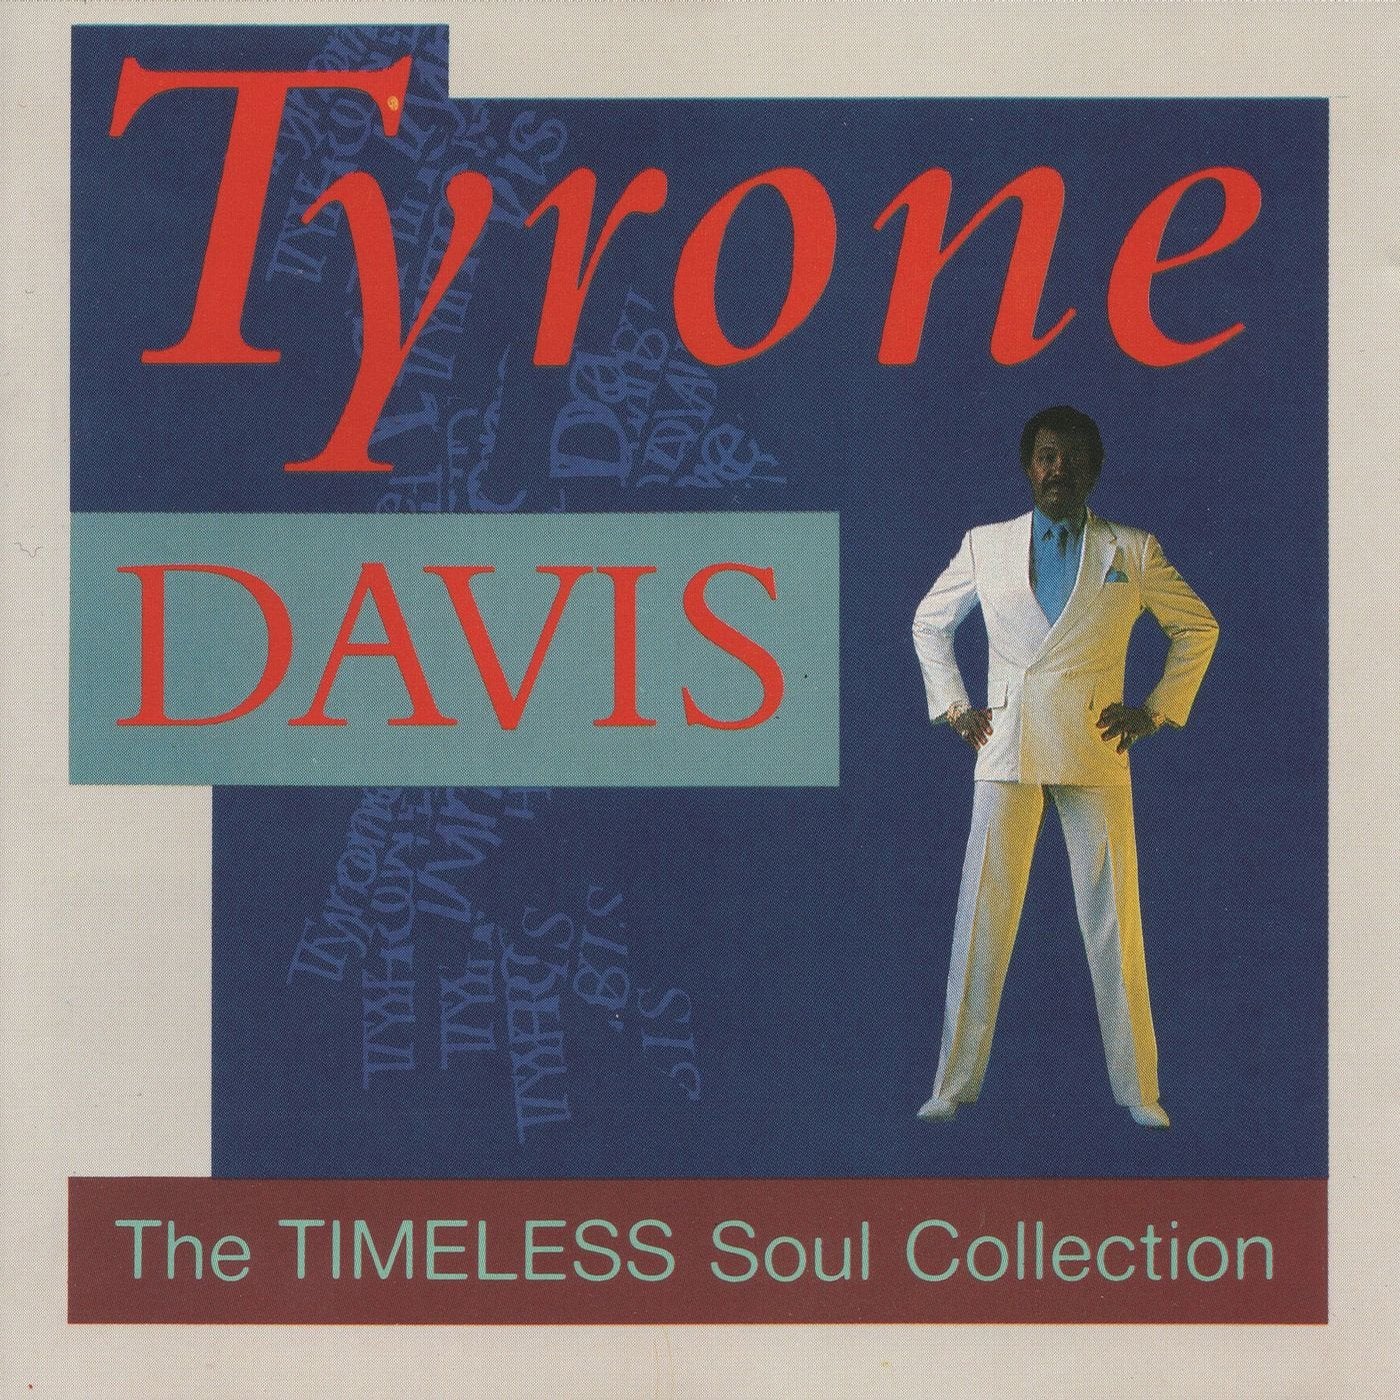 The Timeless Soul Collection